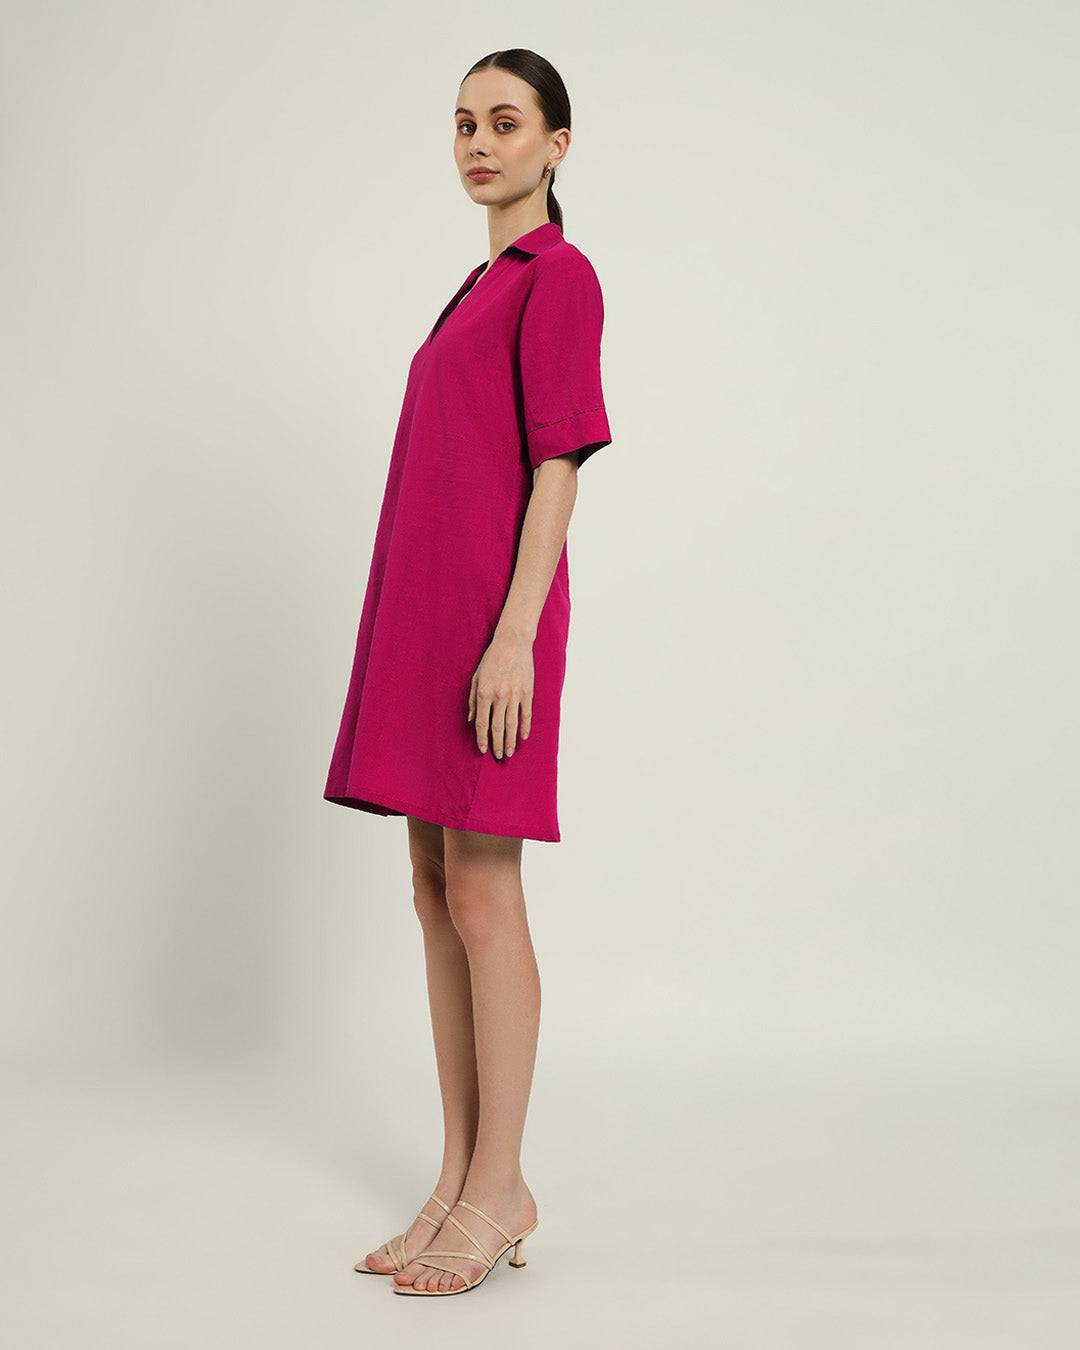 The Ermont Berry Cotton Dress